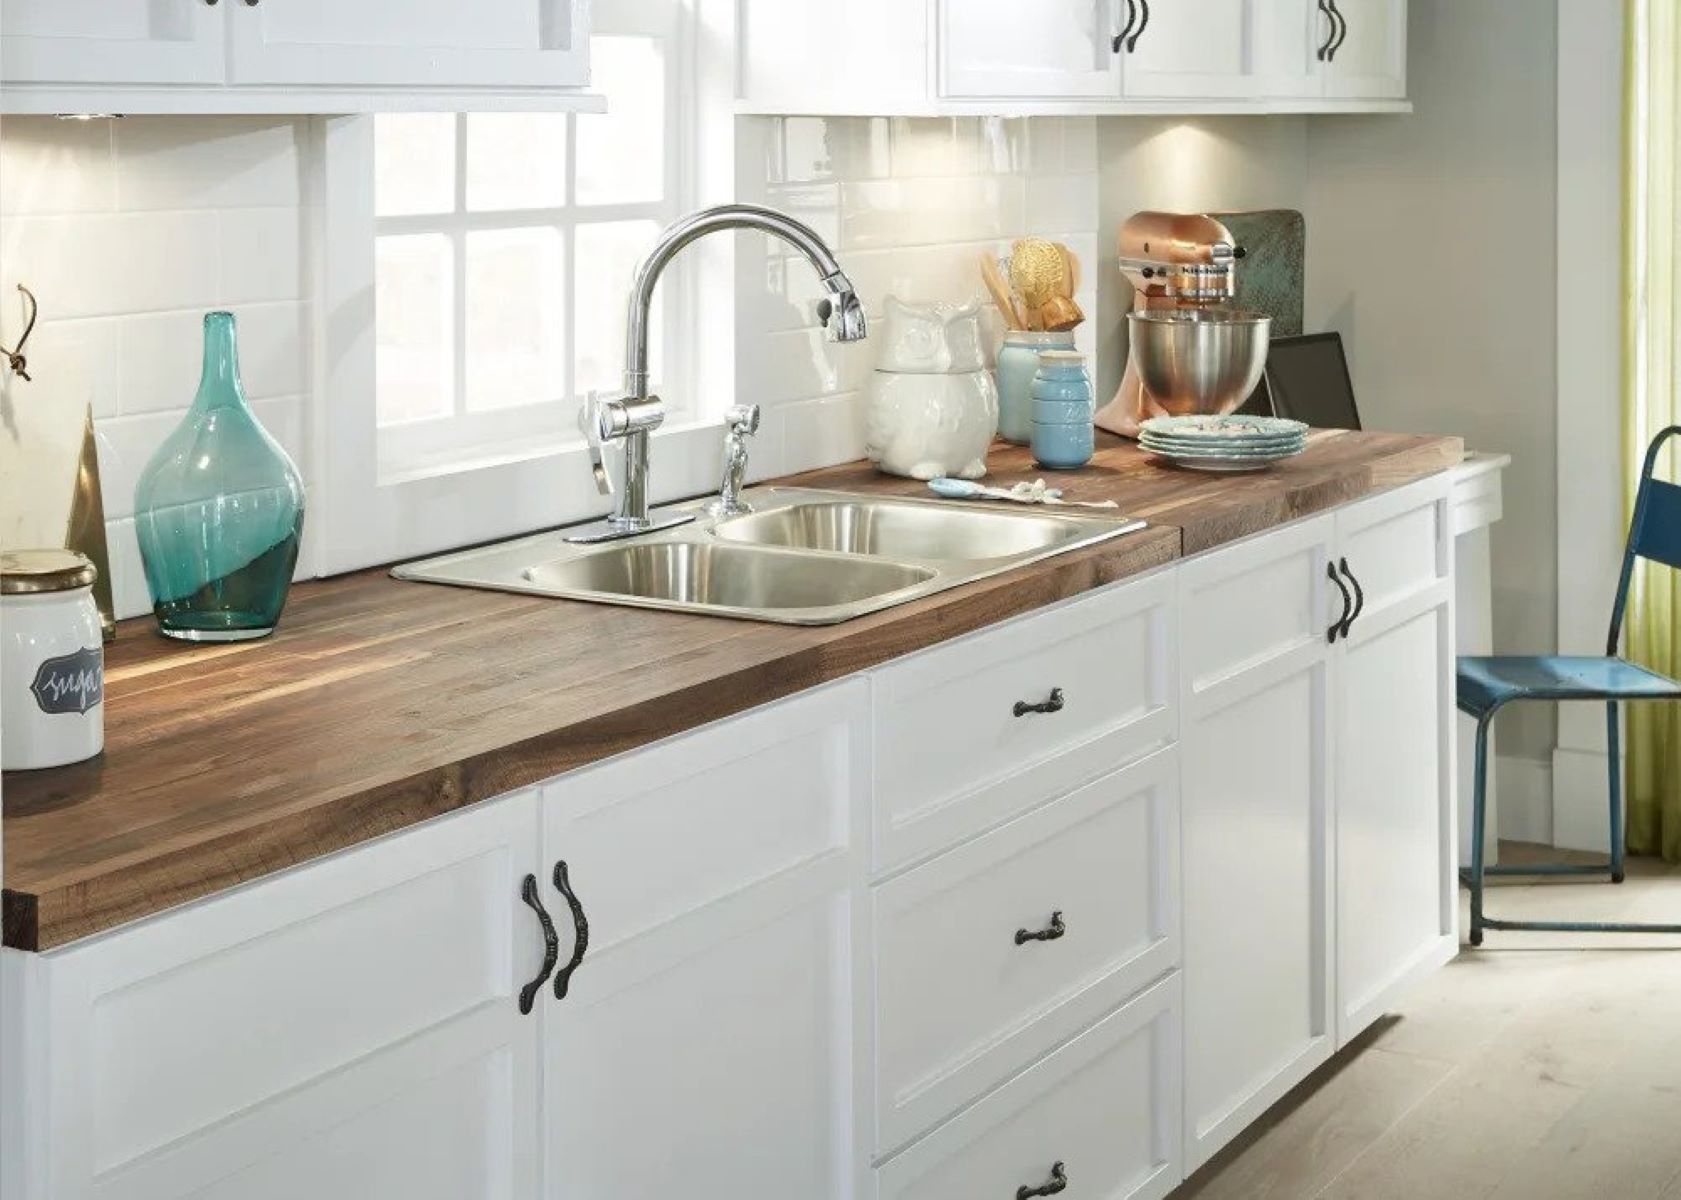 What Kind Of Backsplash Goes With Butcher Block Countertops